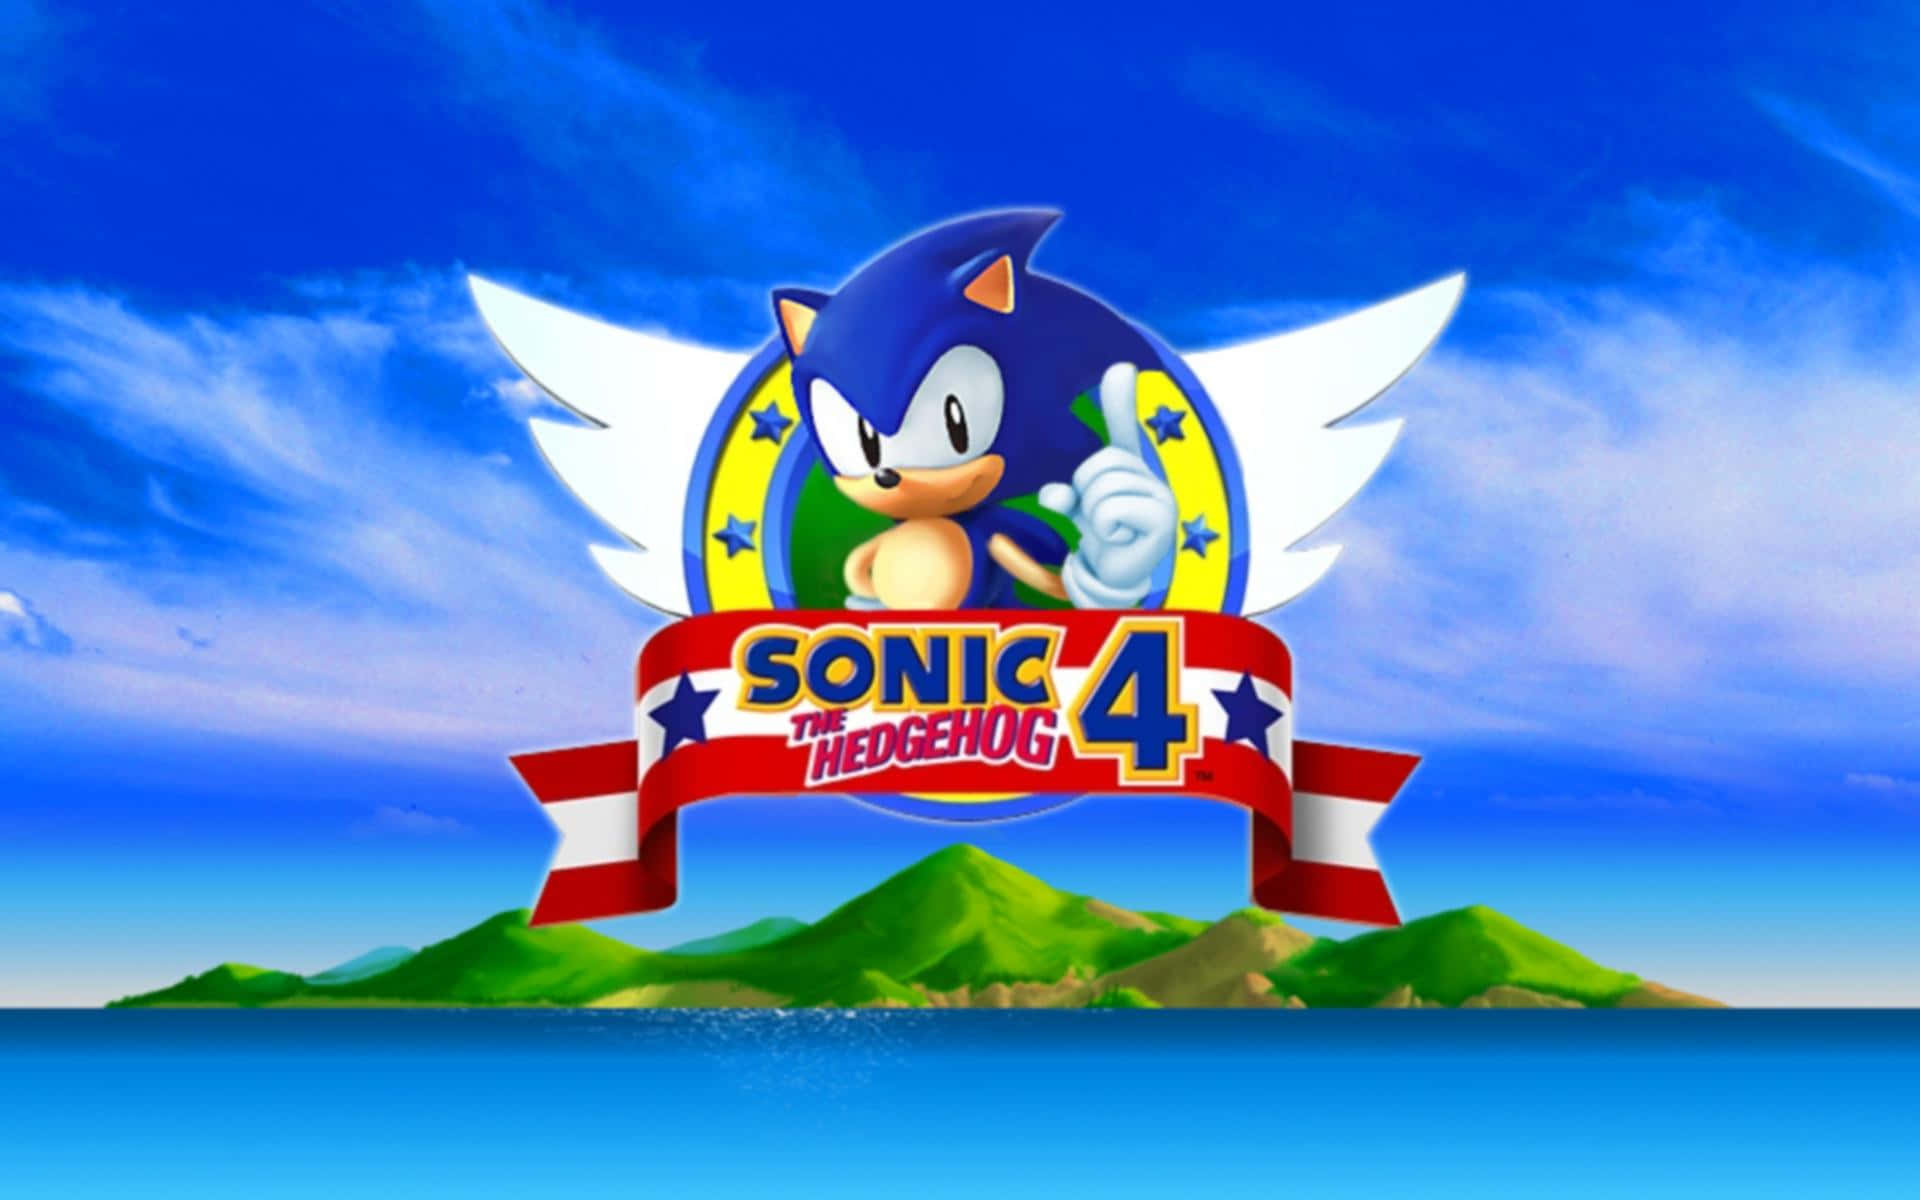 Get ready to dash through beautiful 4K scenery with Sonic The Hedgehog! Wallpaper